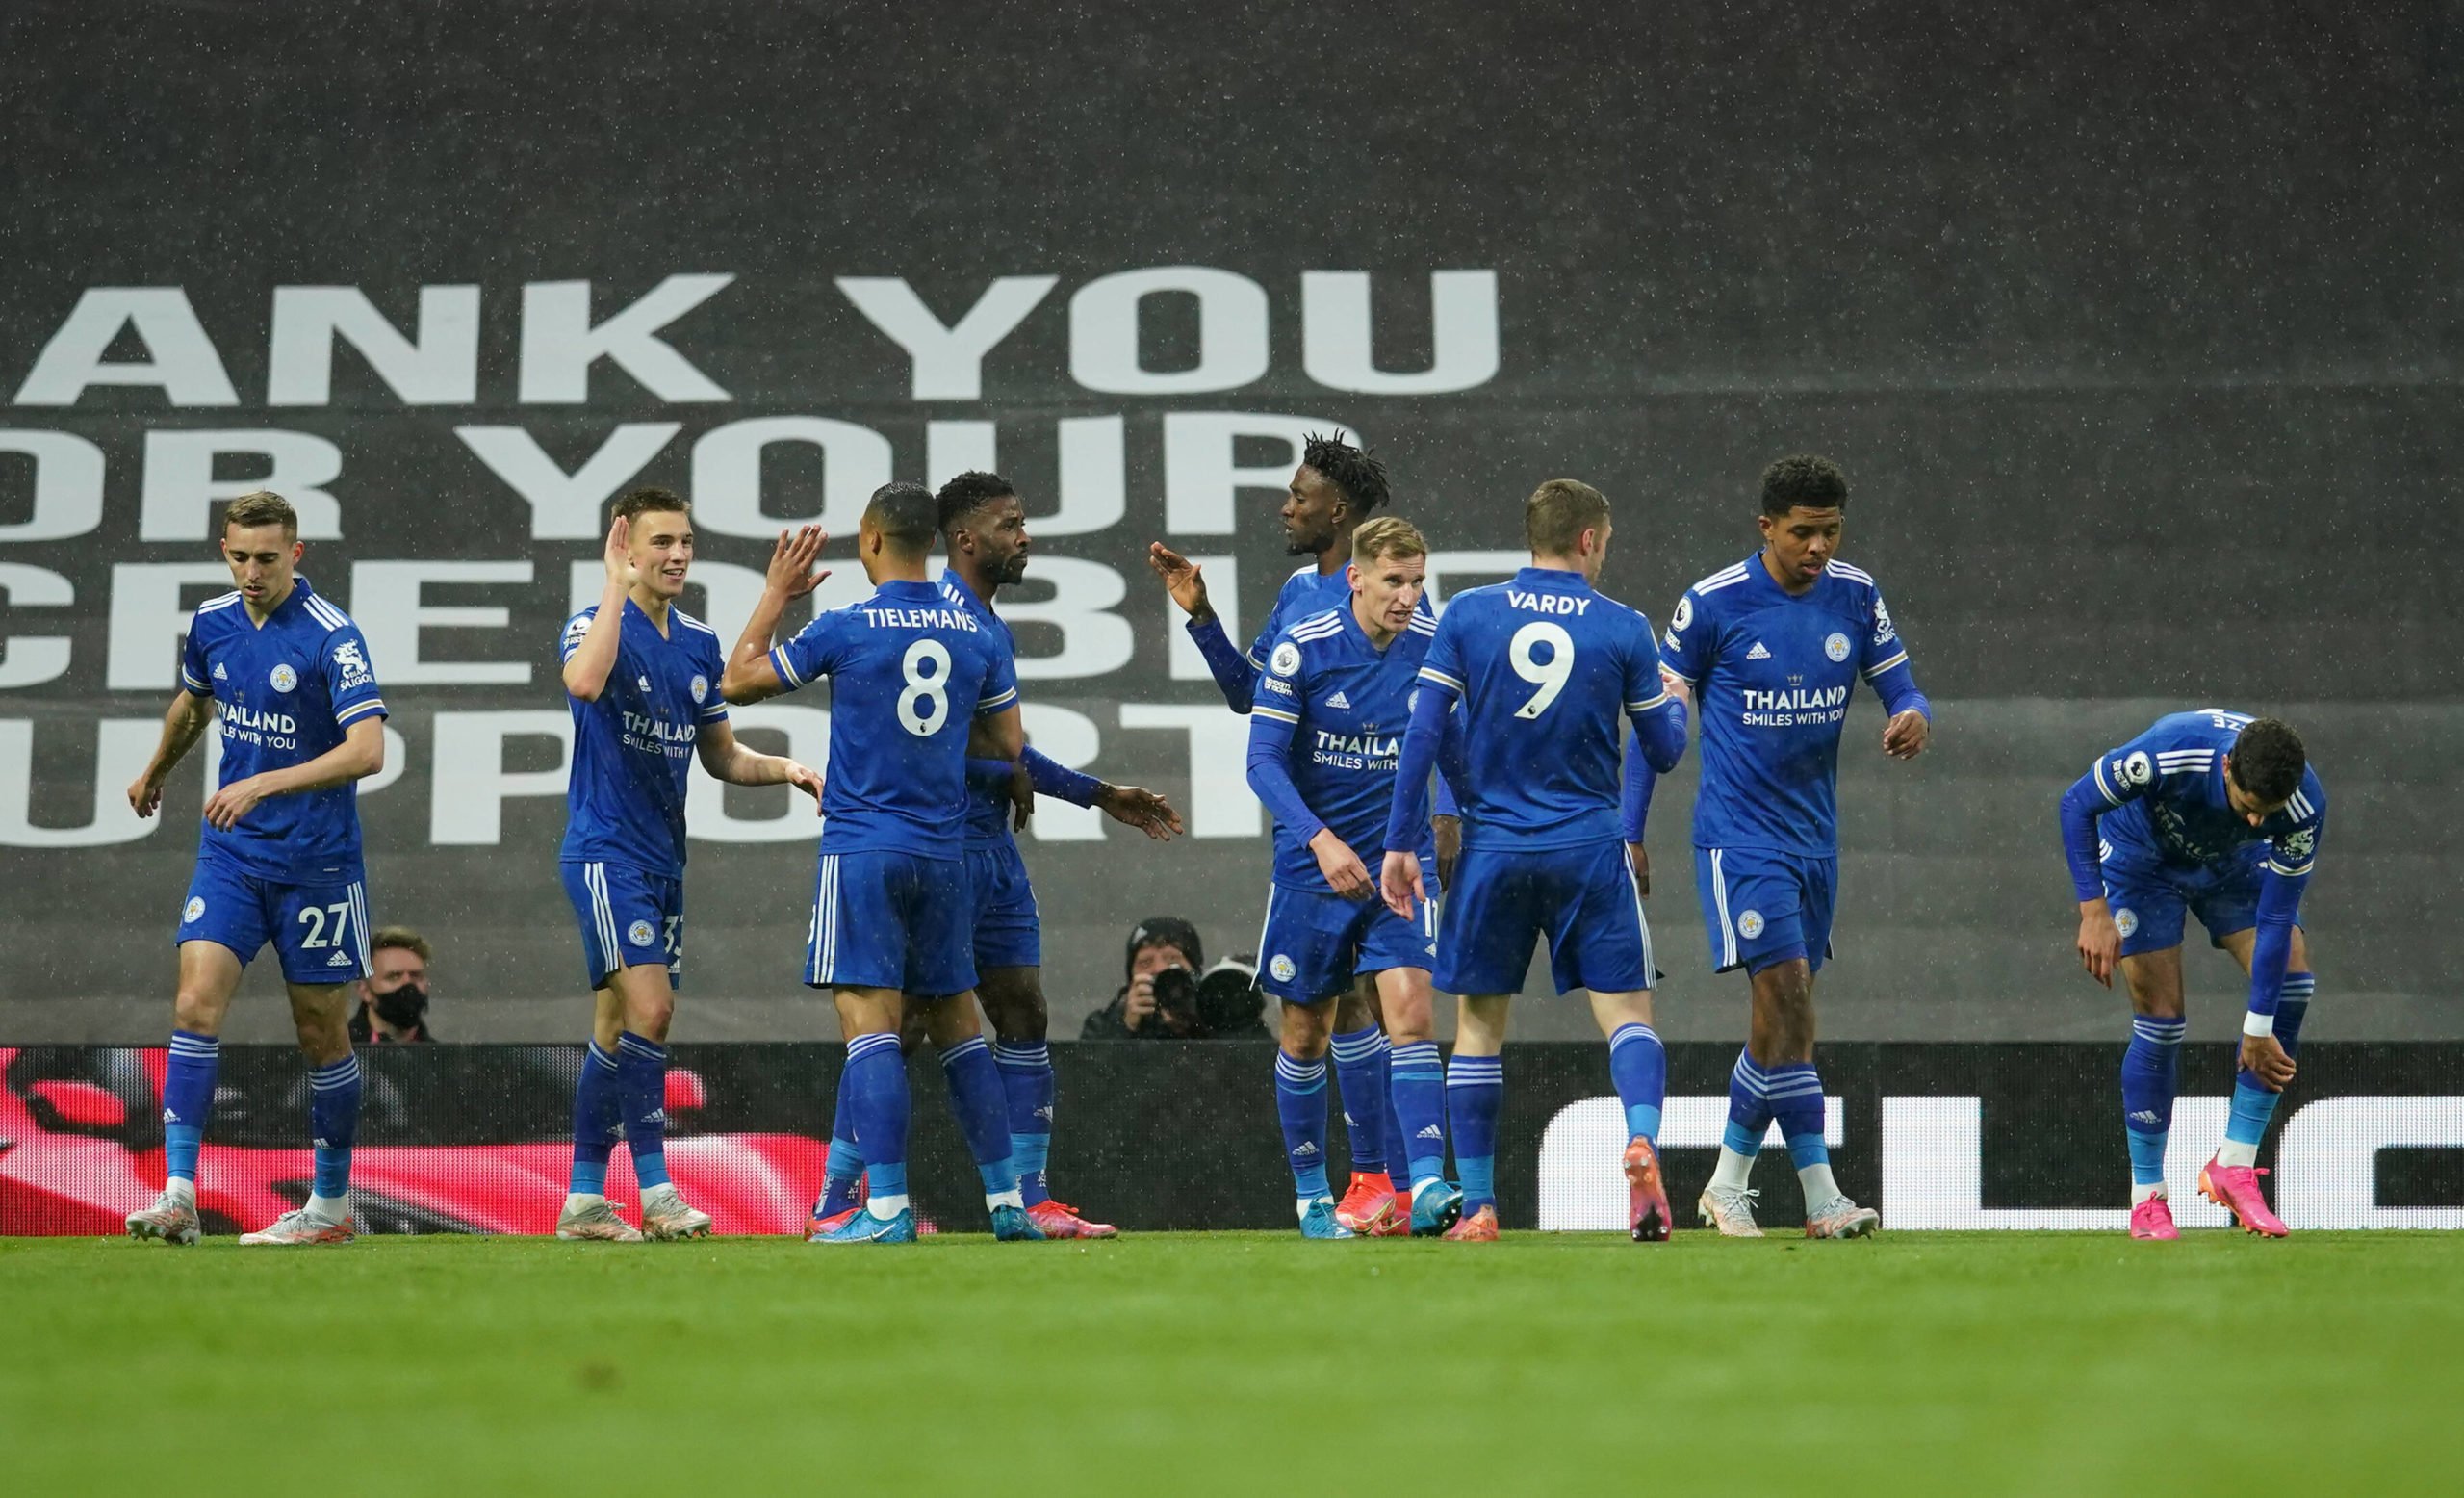 4-2-3-1 Leicester City Predicted Lineup Vs Wolves (Leicester City players are seen in the picture)